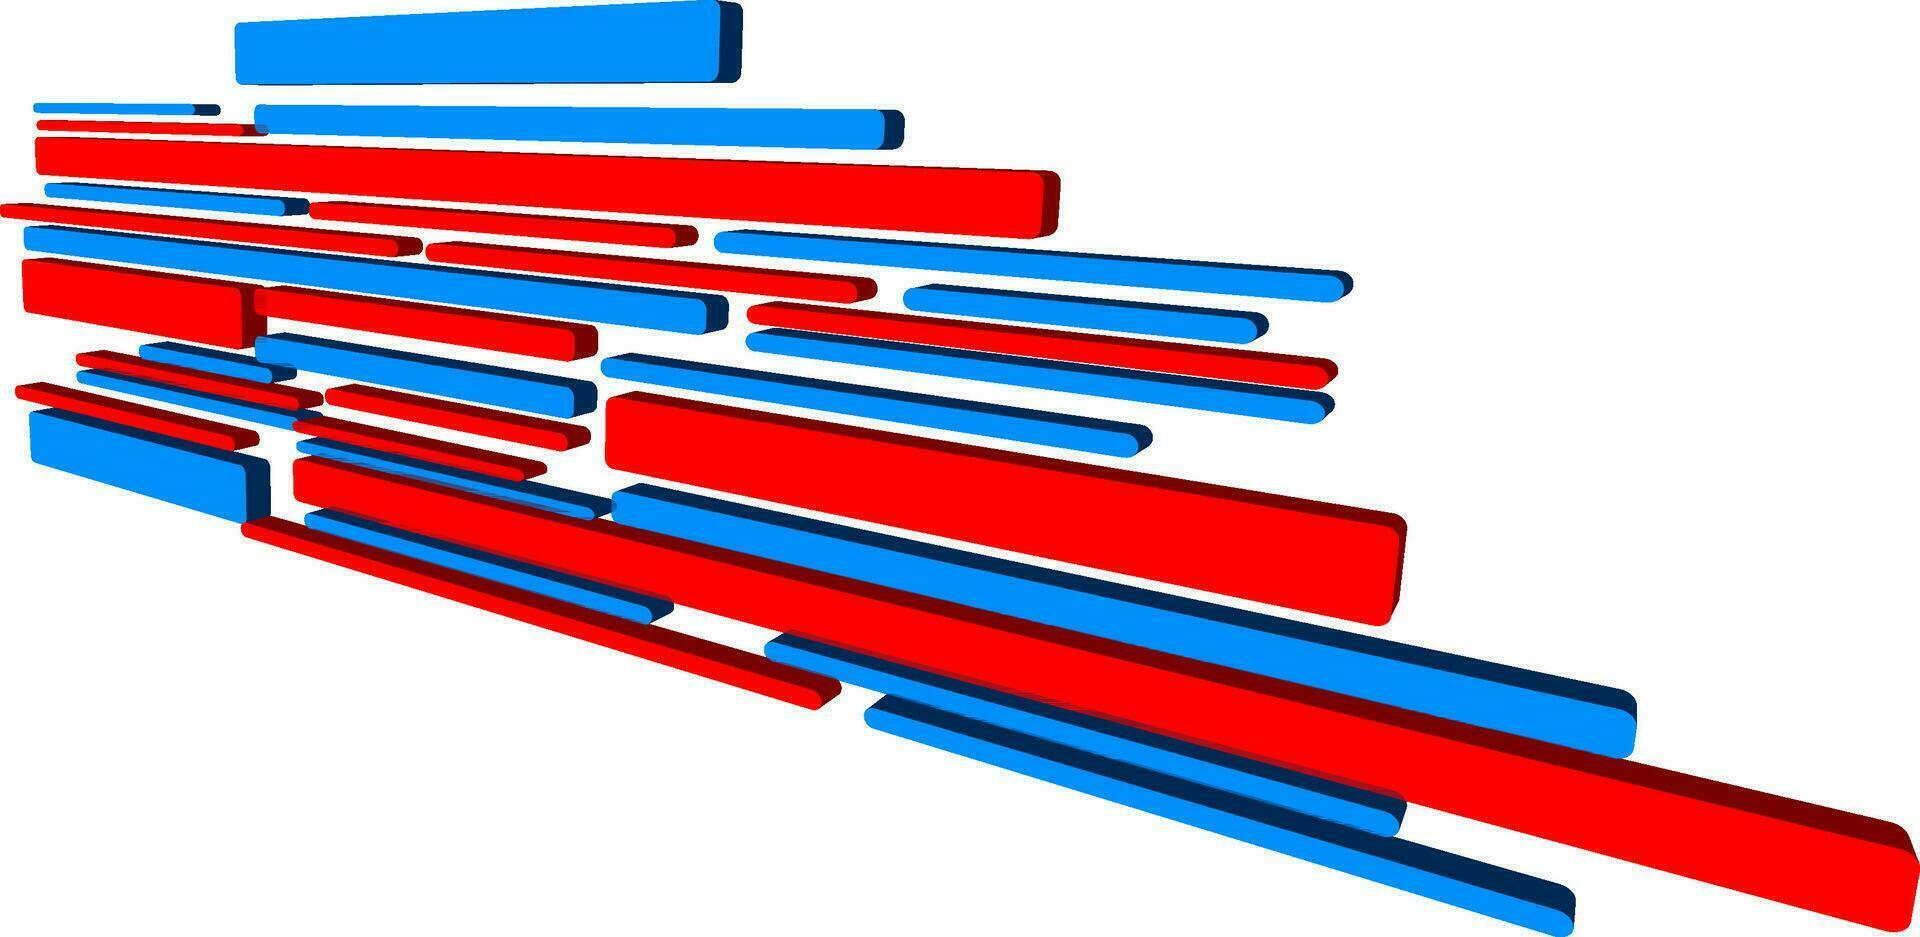 Red and blue abstract stripes element design. vector